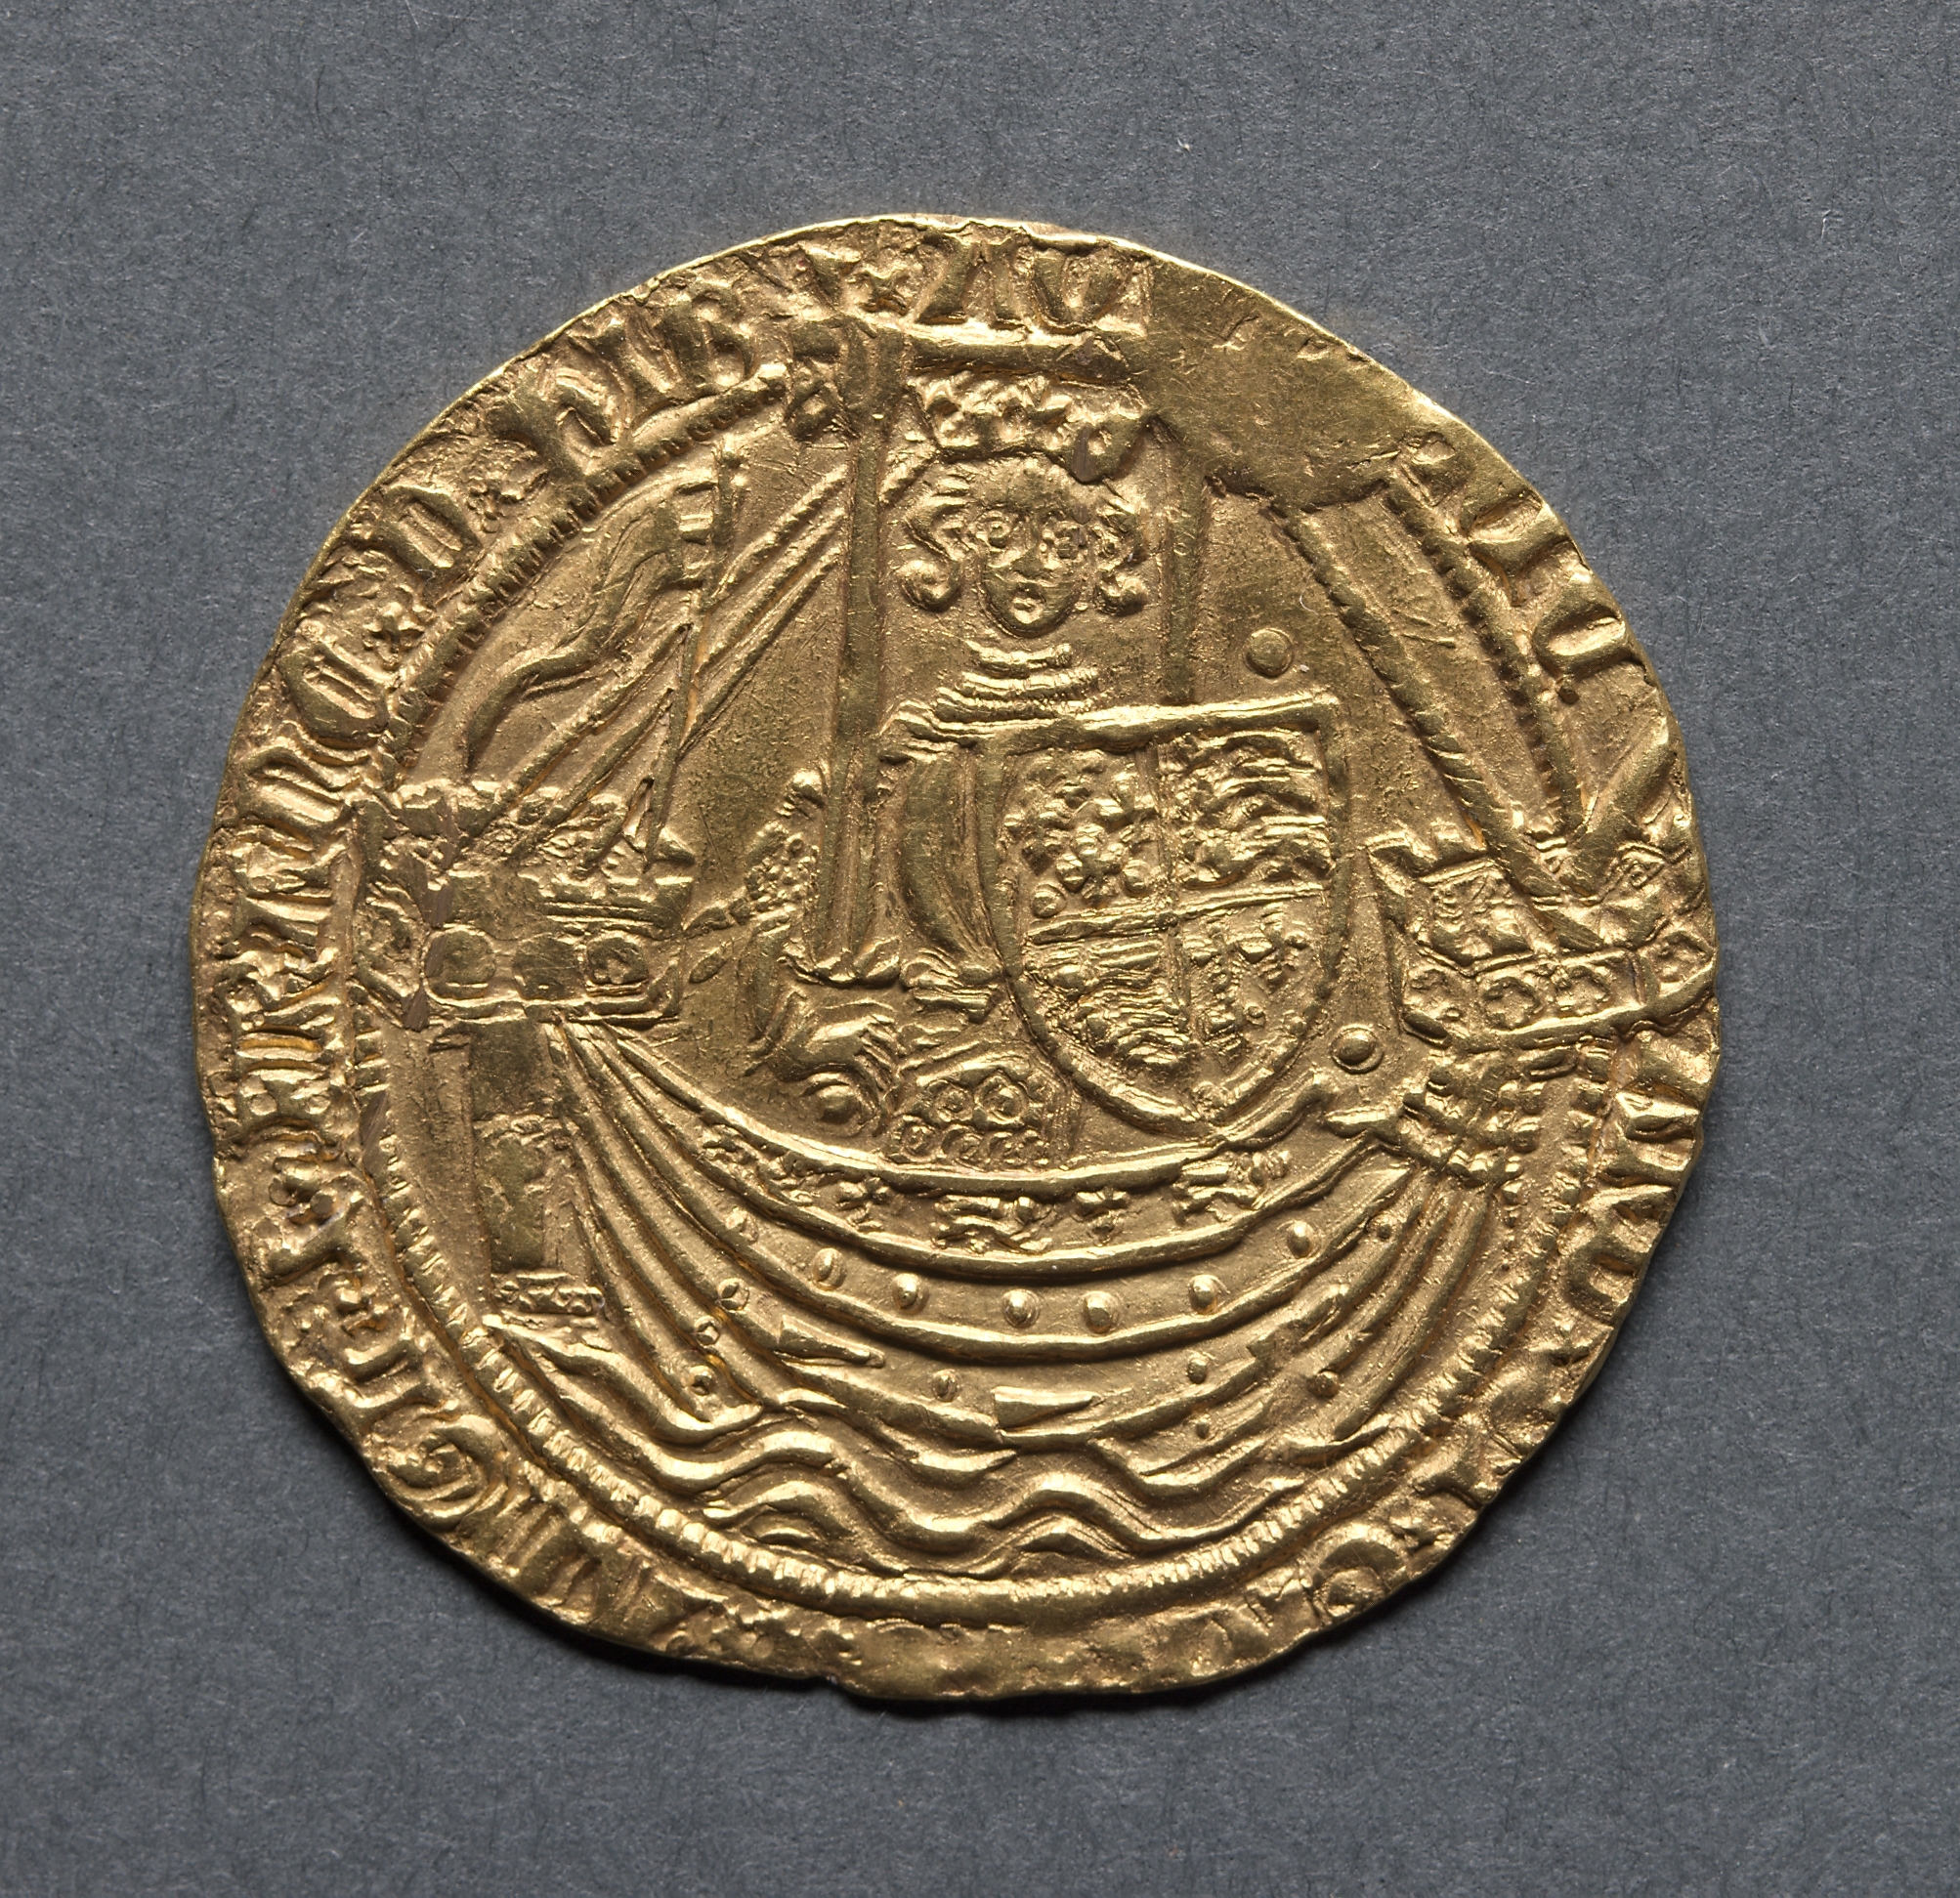 Noble: Richard II Standing on Ship with Shield of Arms (obverse)